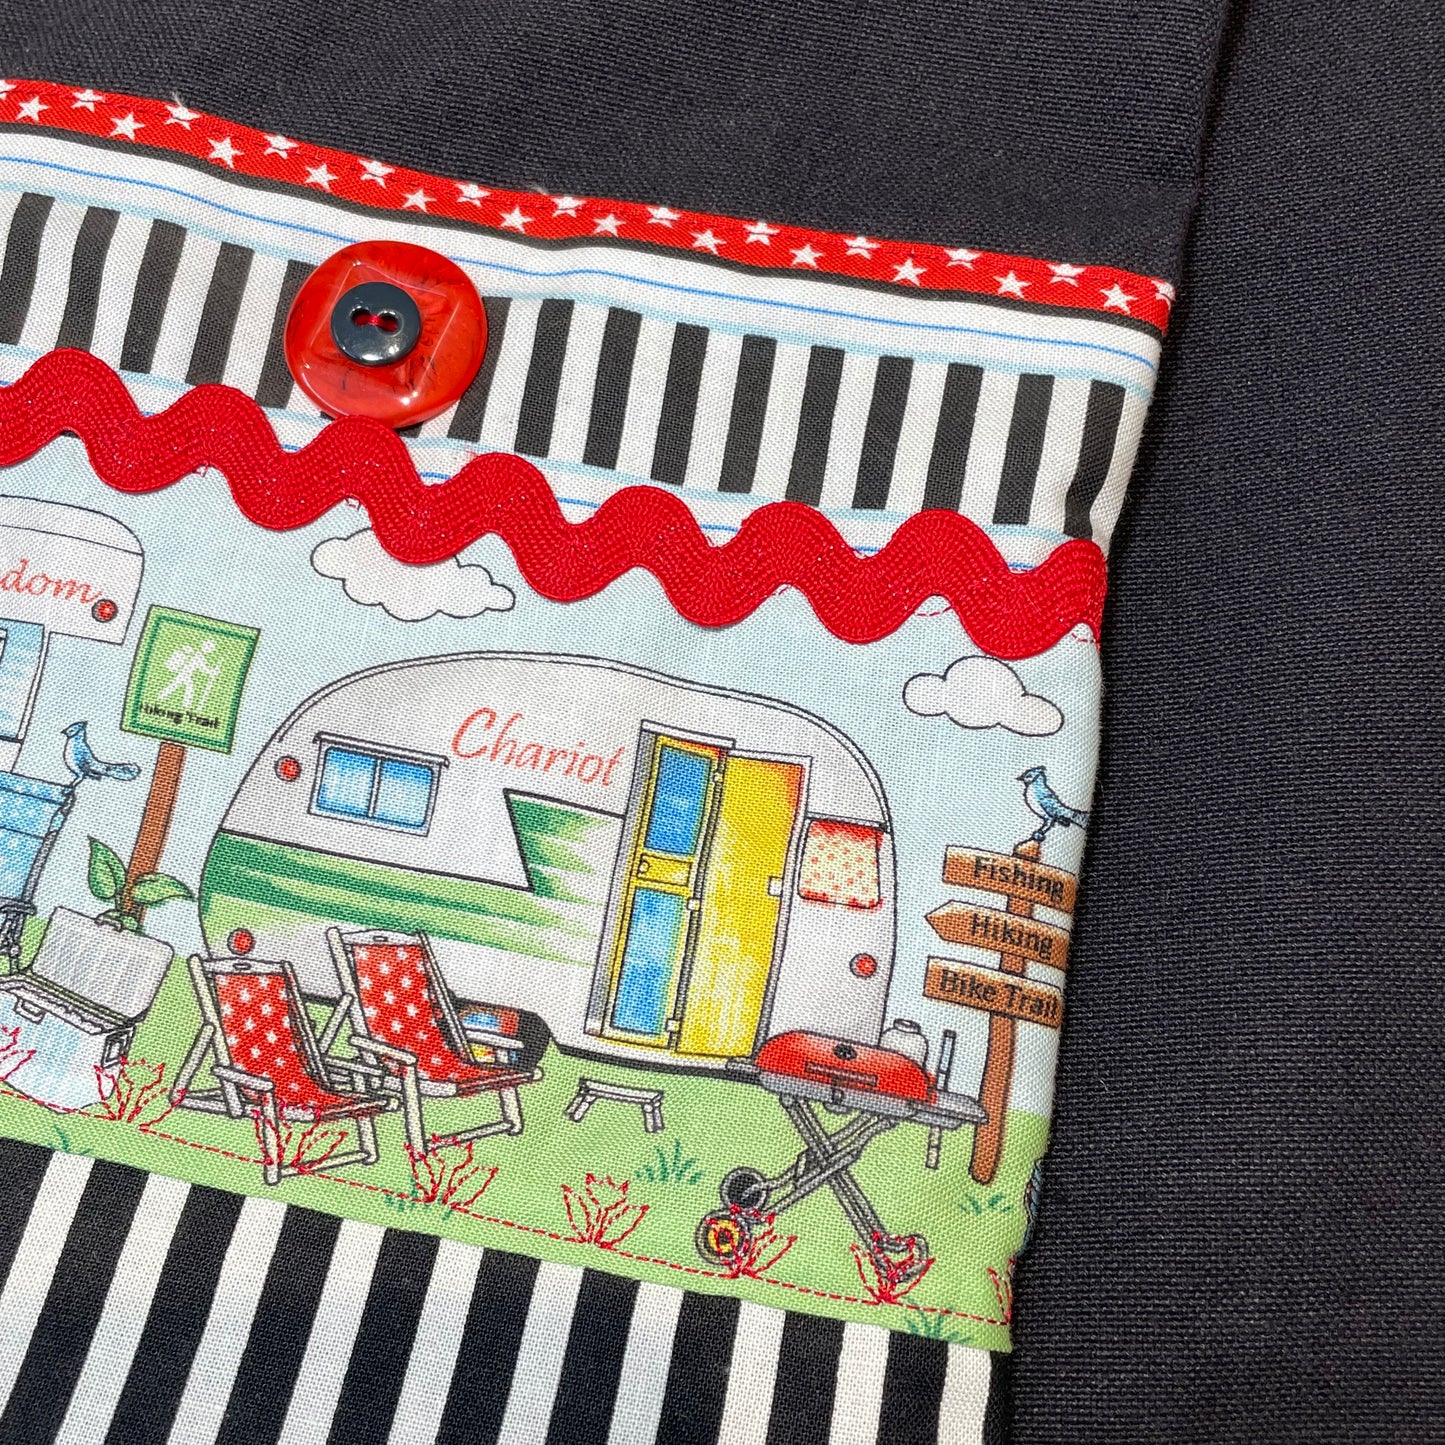 Glaming Decor Idea. Dress up your RV, Travel Trailer or Cabin with cute dish towles featuring retro campers. Black Dish Towel with red, white and black details. Handcrafted in Canada. Part of a collection of coordinating decor items. Shop the entire collection online. Find me at a local Farmers Market or follow along on the Home Stitchery Decor YouTube Channel. 